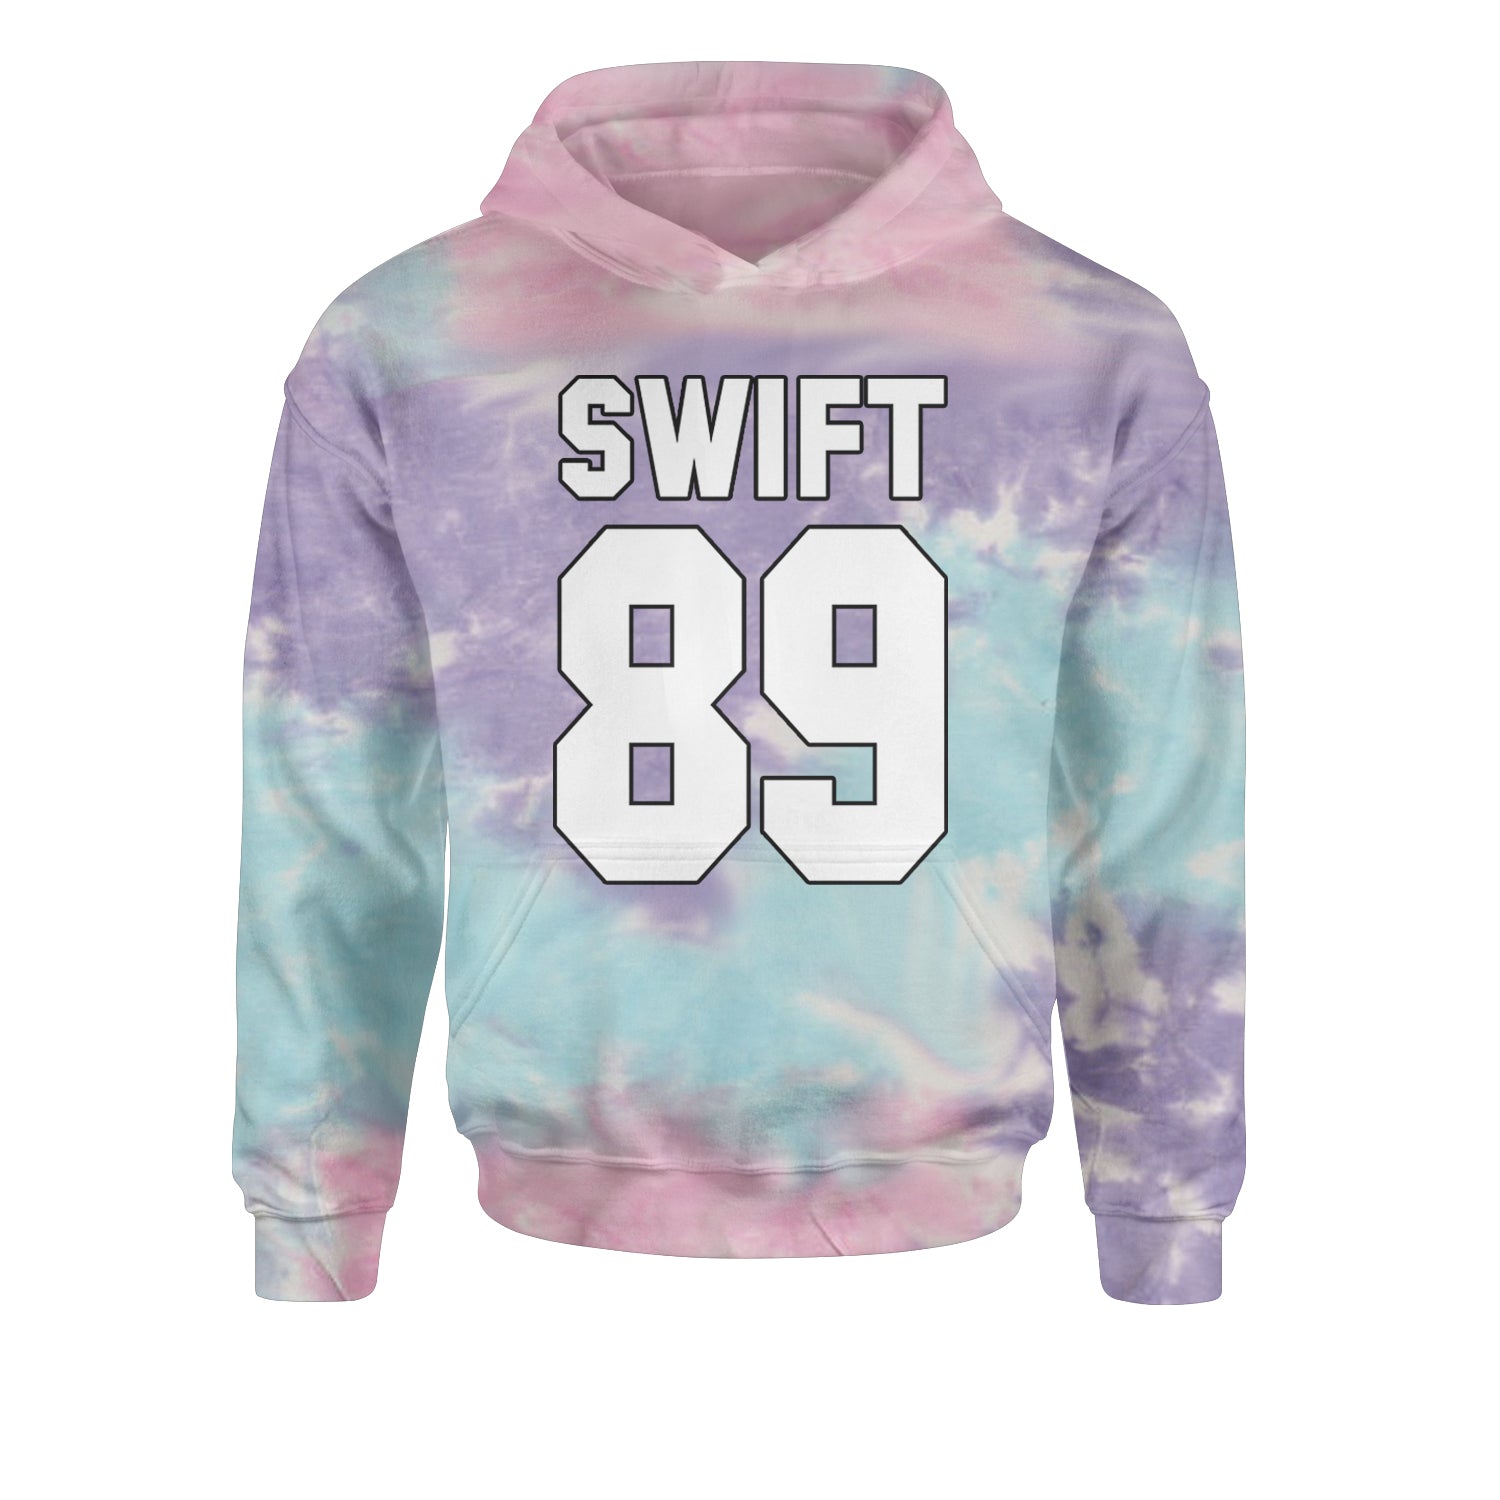 Swift 89 Birth Year Music Fan Era Poets Department Lover Youth-Sized Hoodie